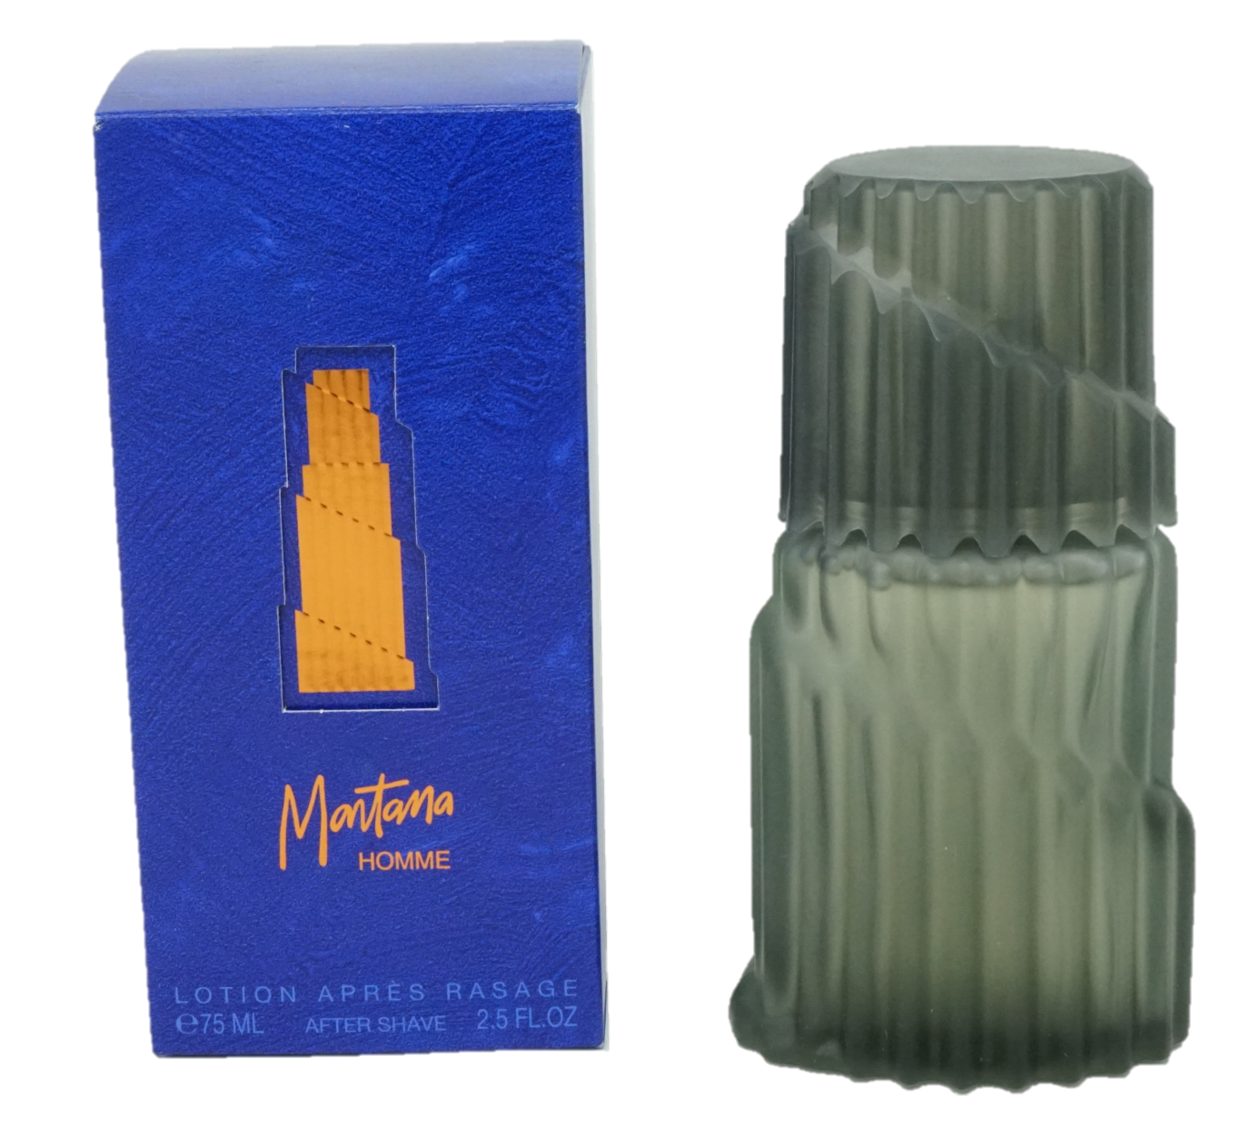 MONTANA After Shave Lotion Montana Homme After Shave Lotion 75ml